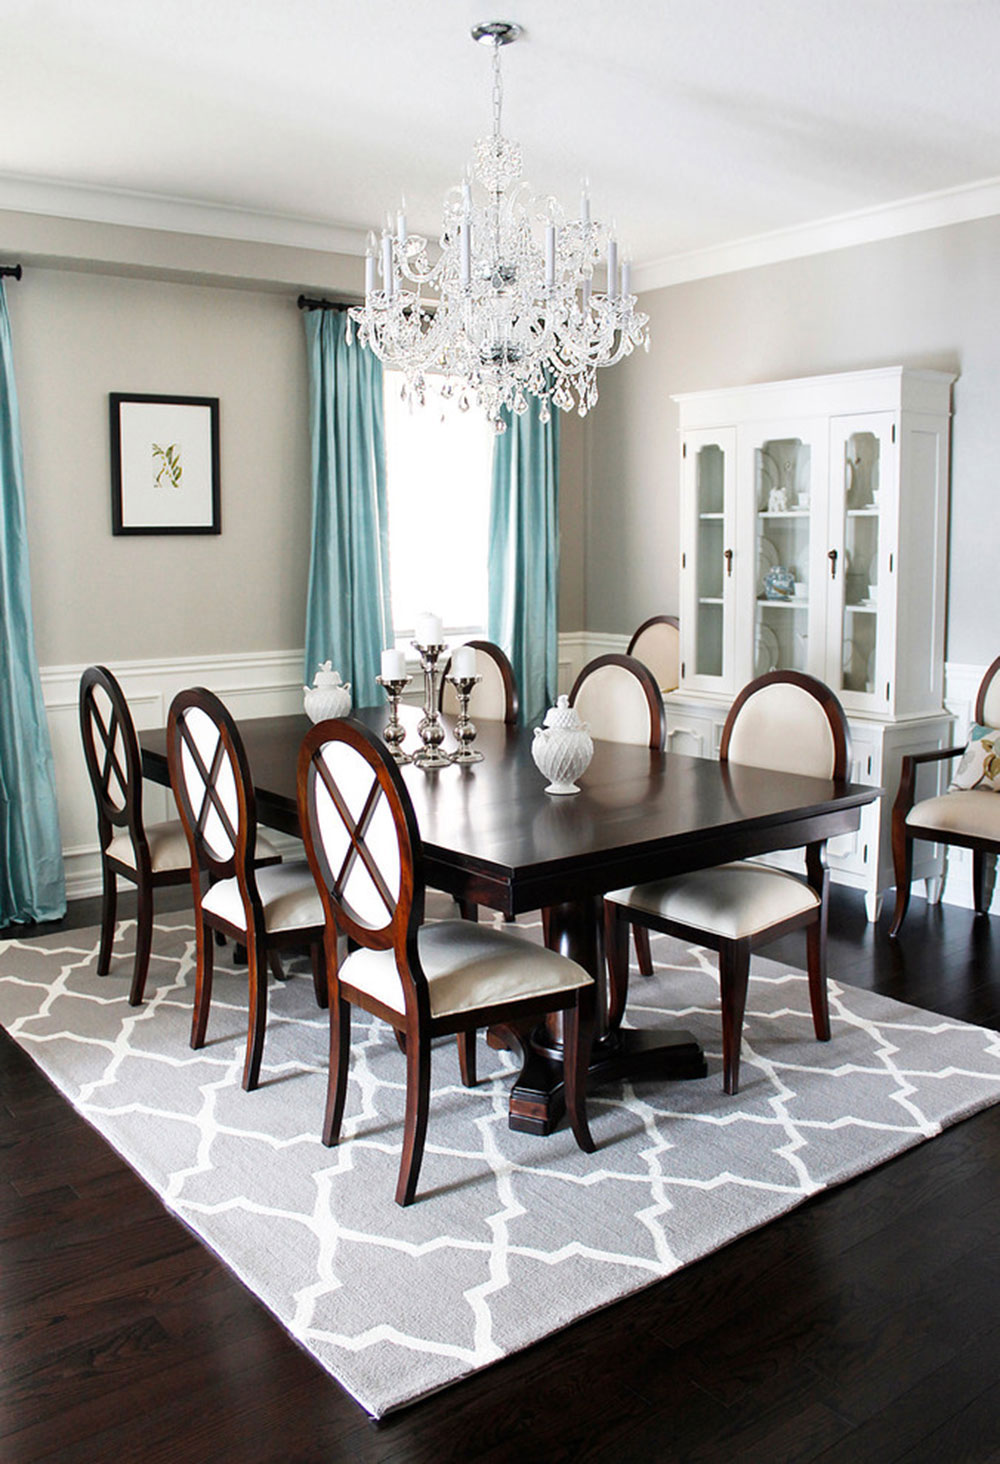 How to choose a chandelier for the dining room2 How to choose a chandelier for the dining room